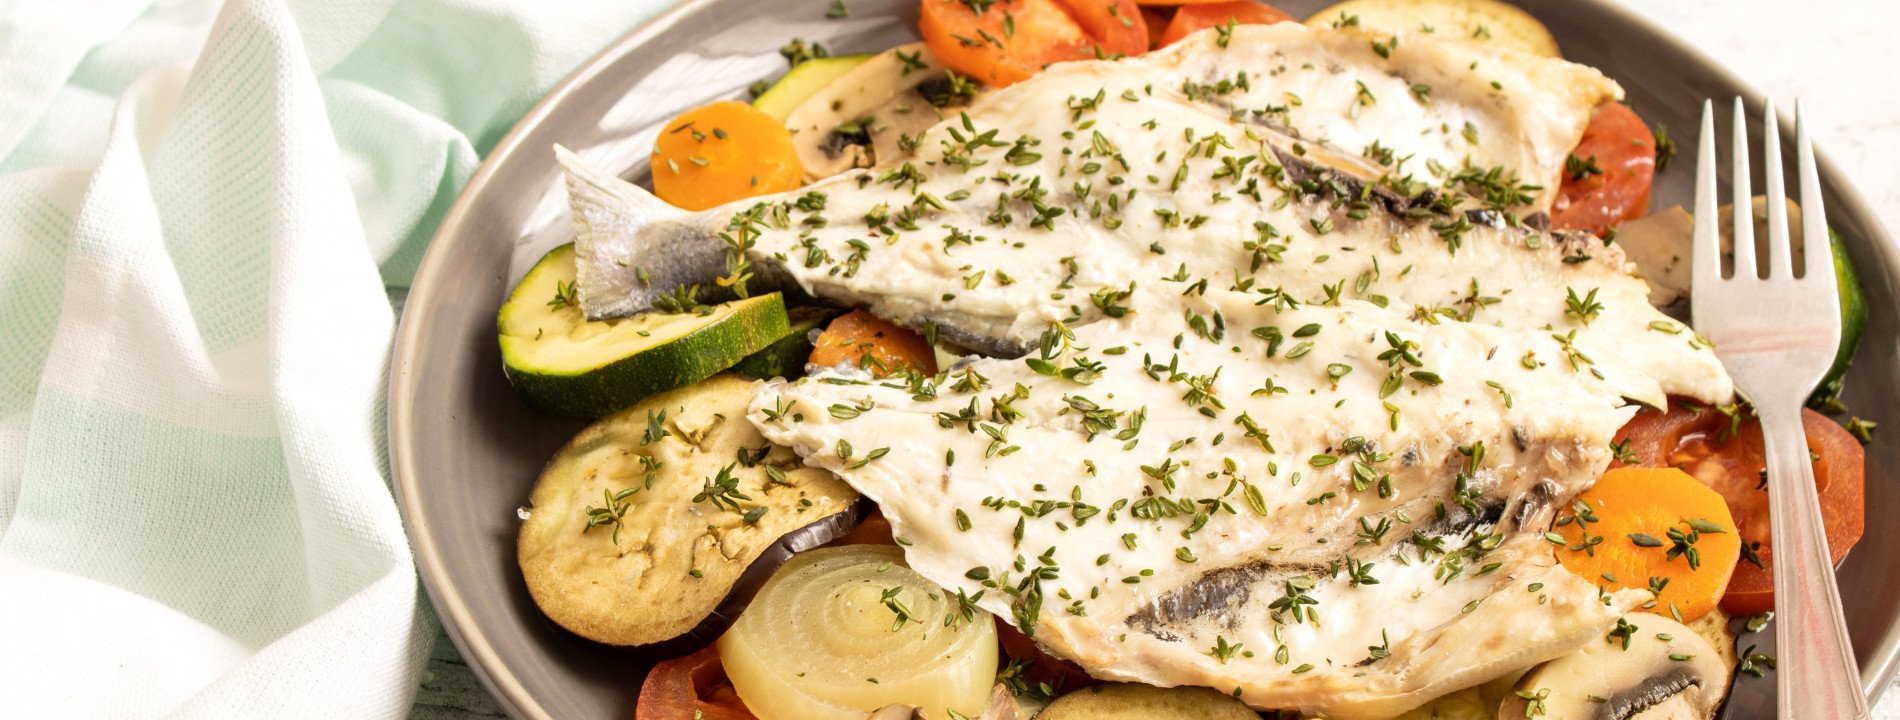 Corvina with Oven Vegetables